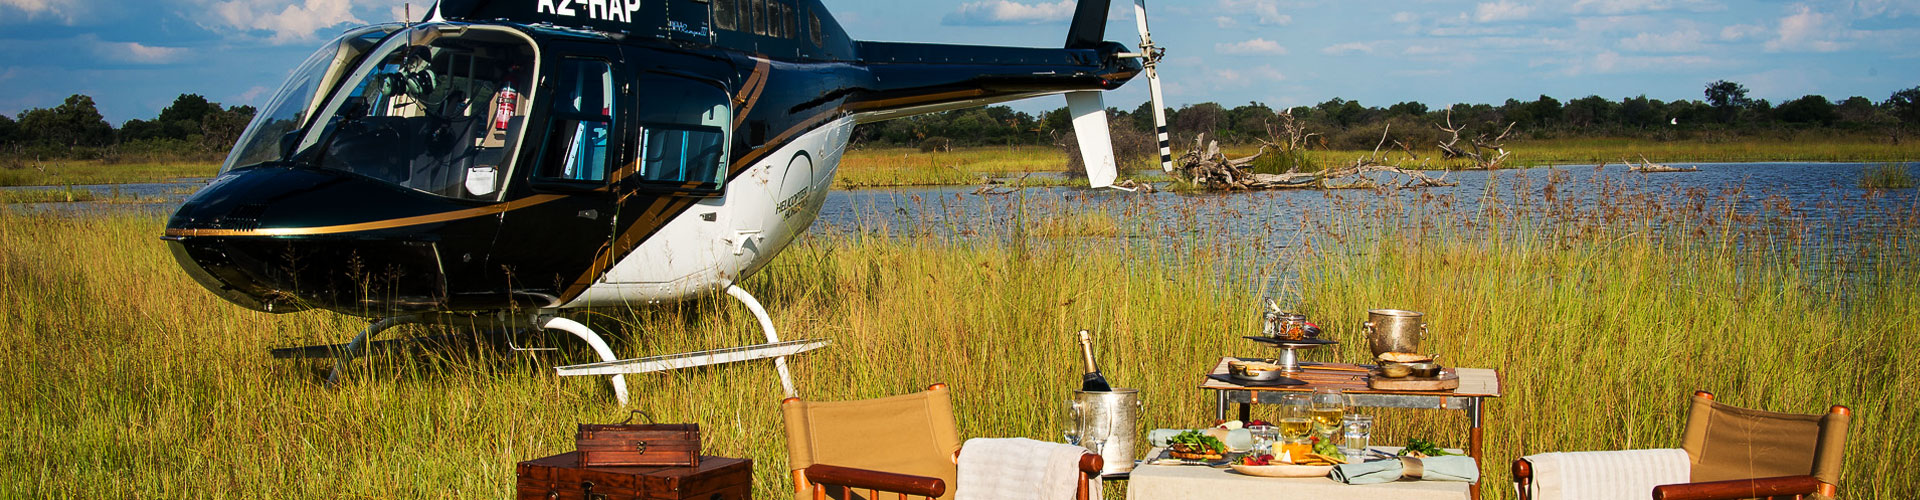 Fly Across Africa Into Uncharted Africa helicopter safaris luxury holiday